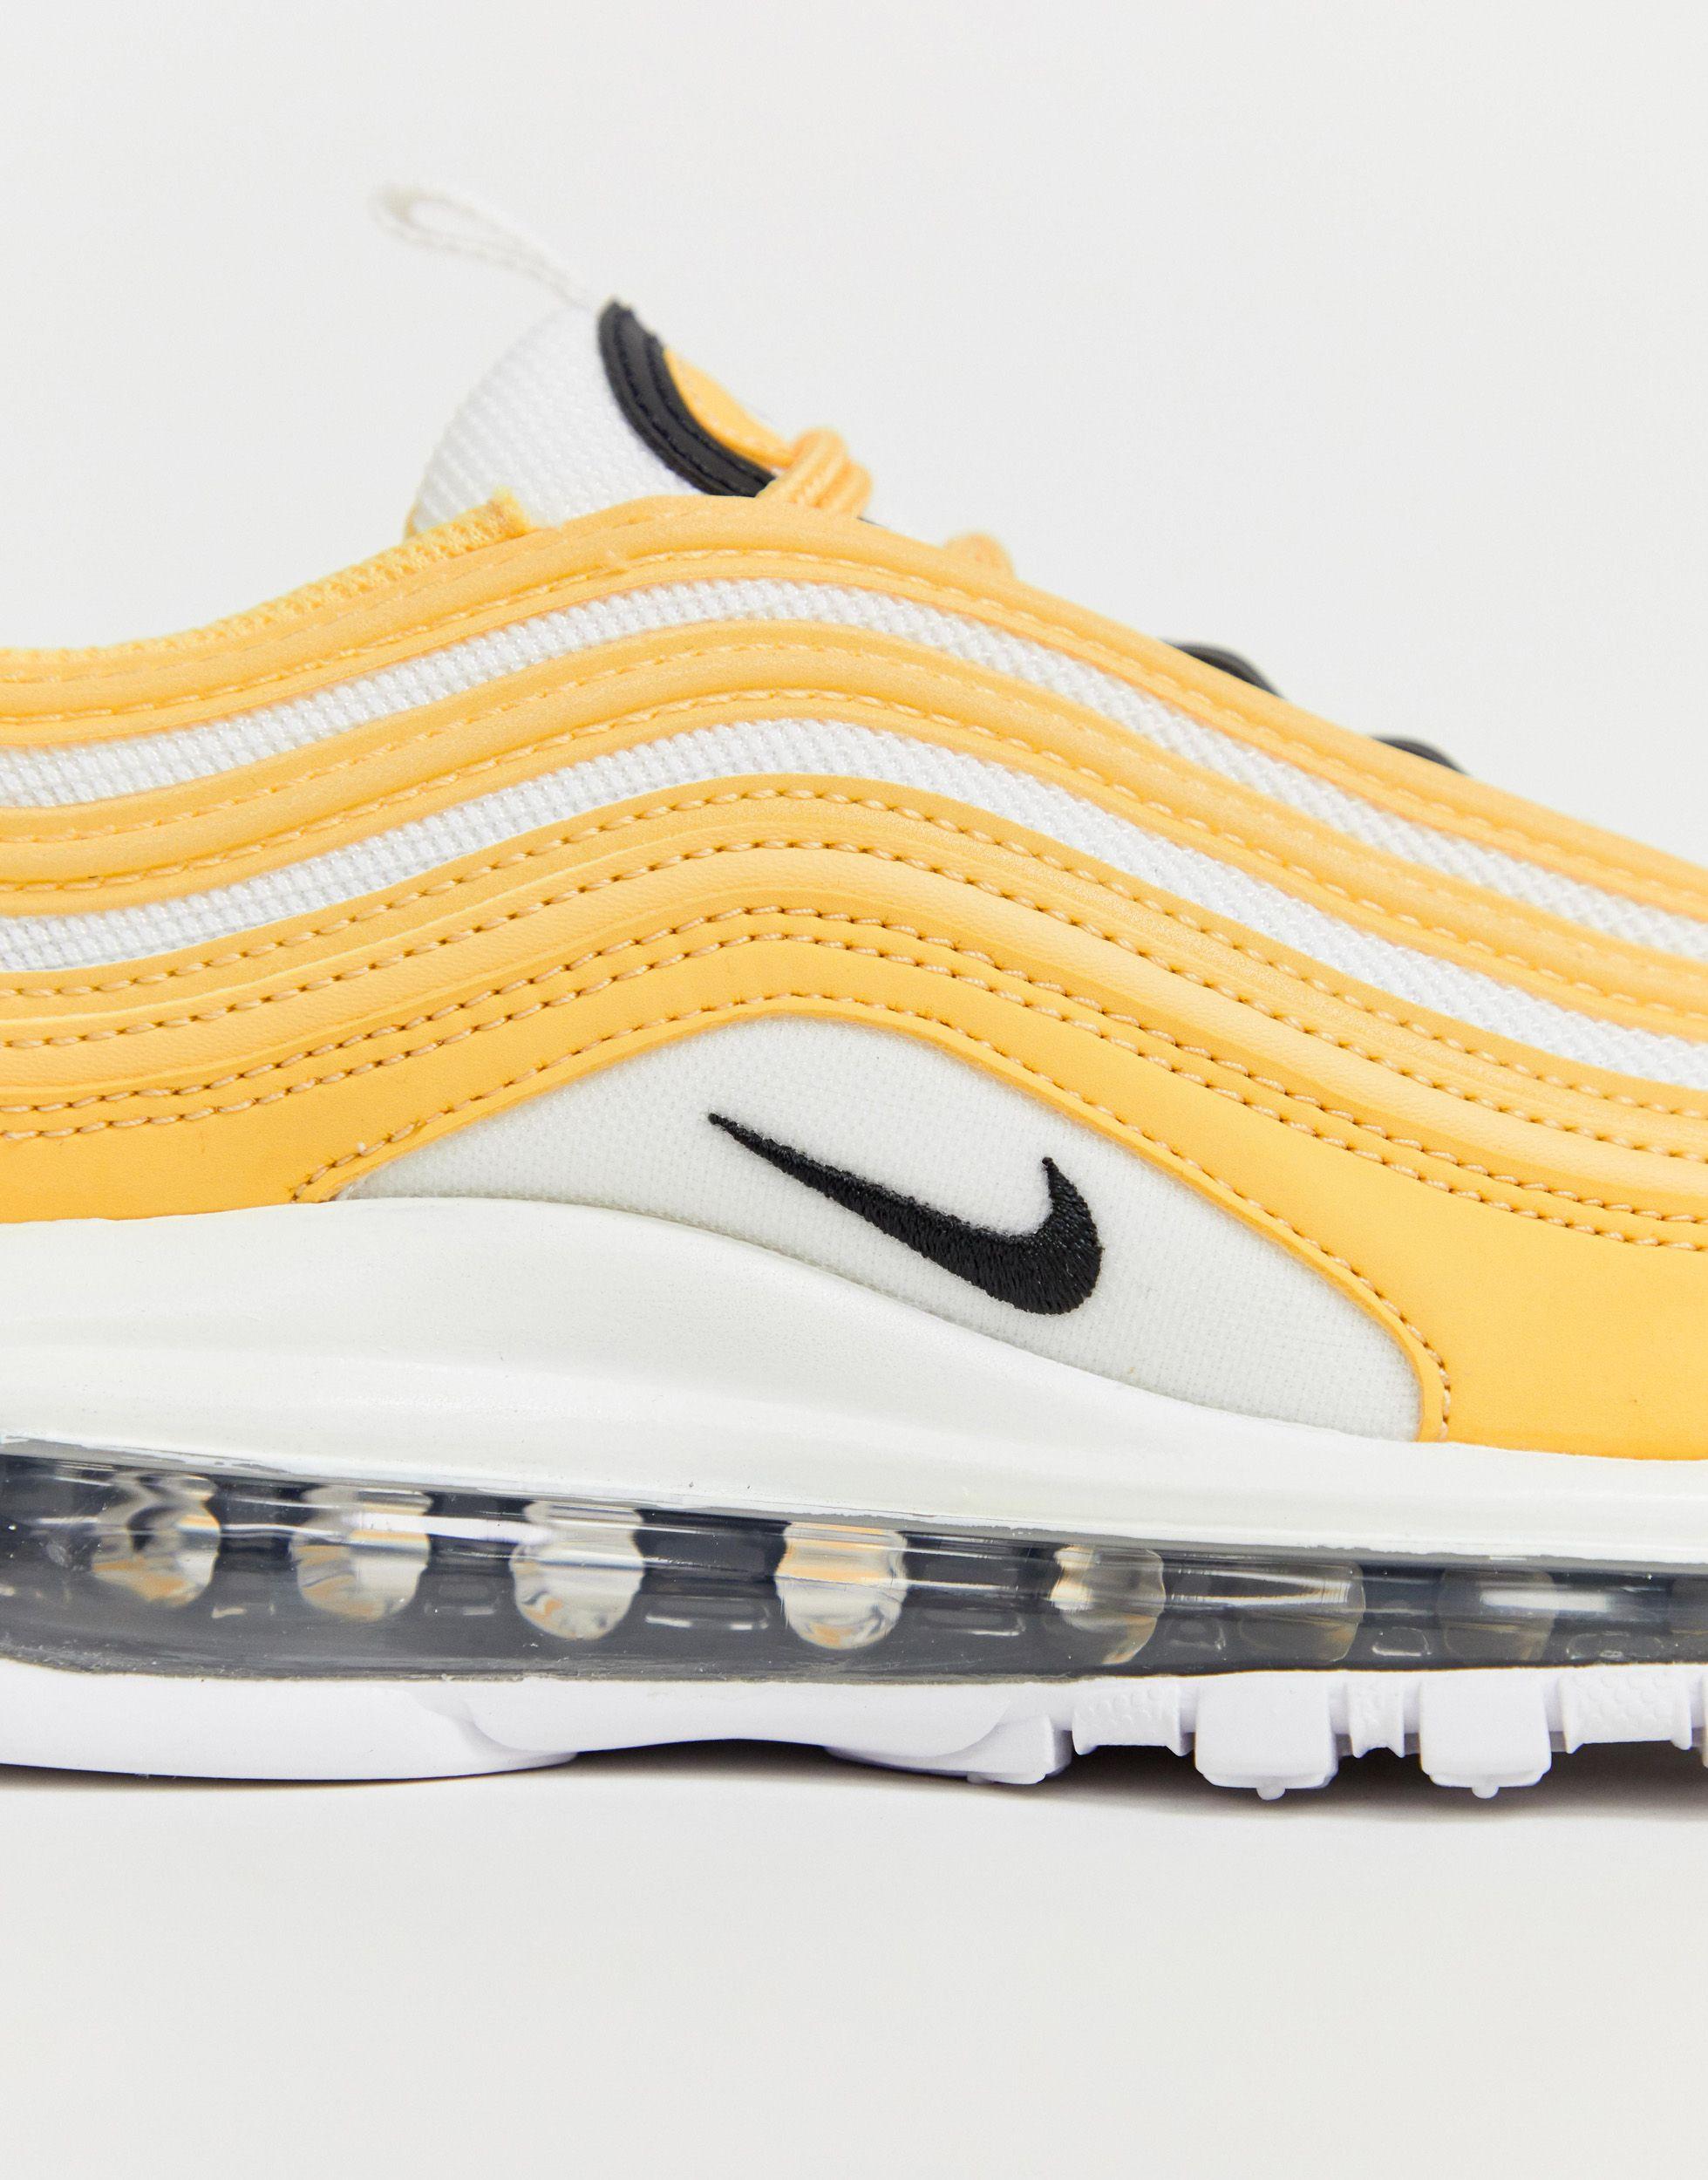 Nike Rubber Air Max 97 Trainers in Topaz Gold/Black-White (Yellow) - Lyst